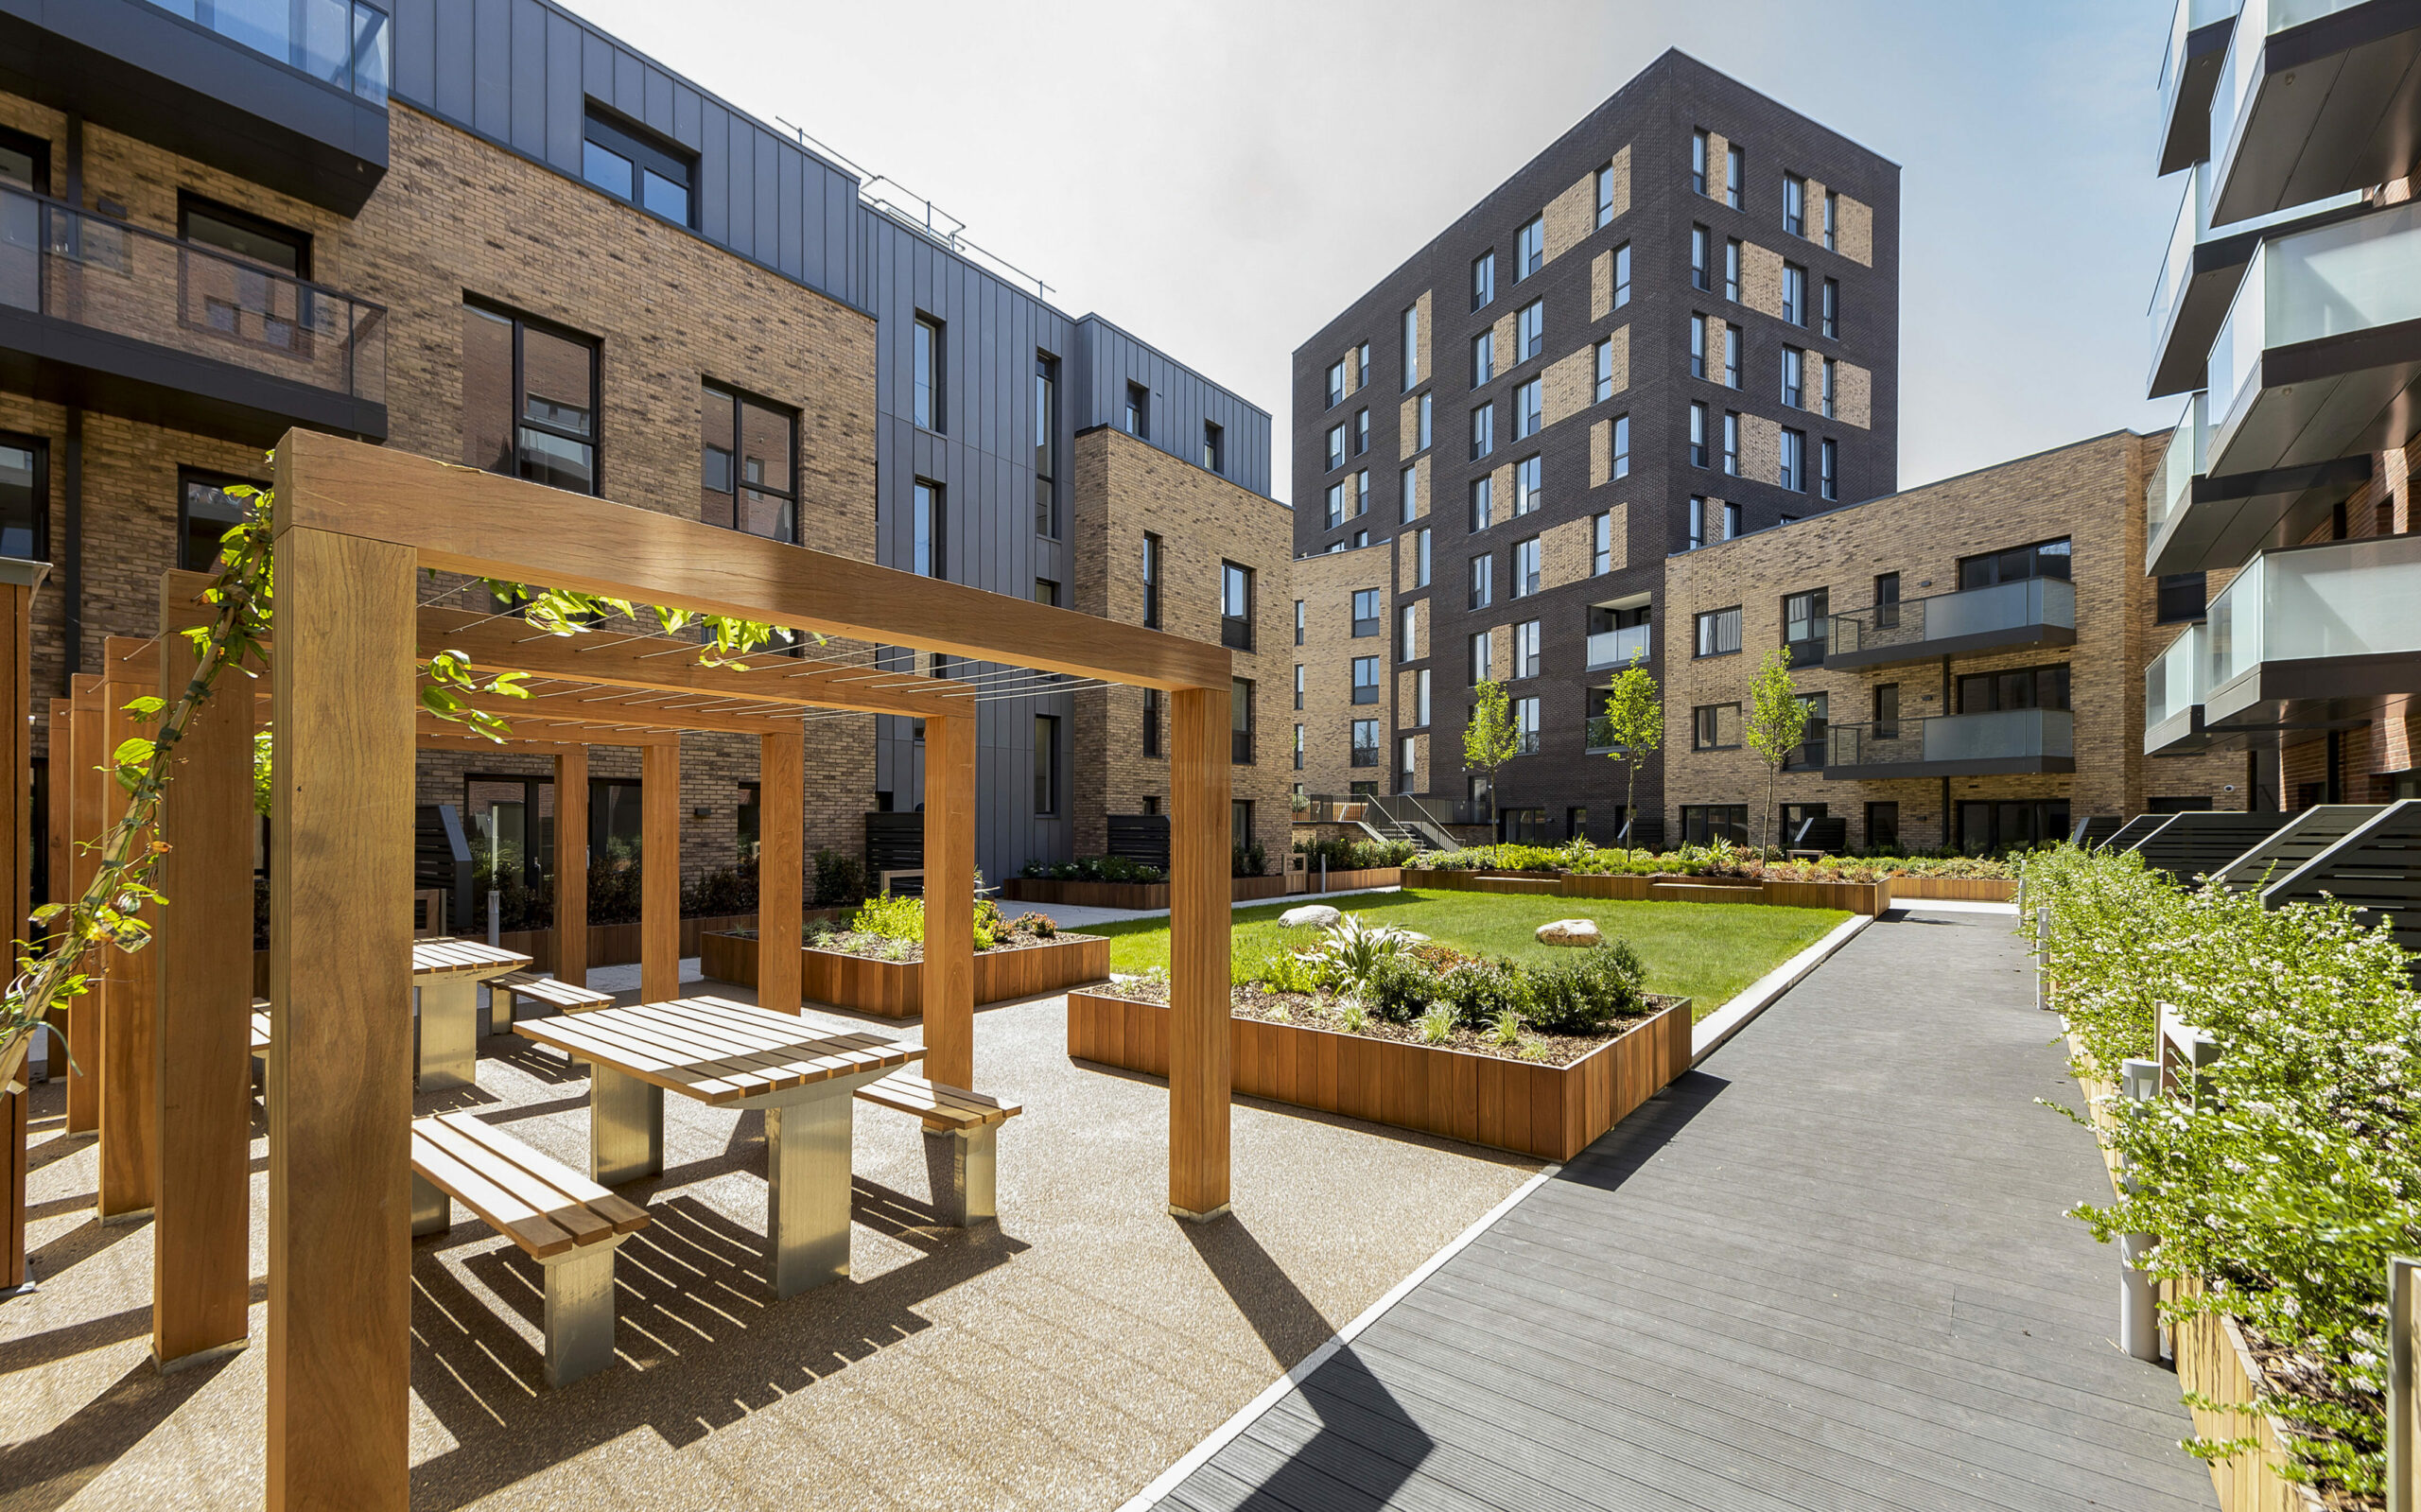 External photography at Notting Hill Genesis' Peckham Place - Shared Ownership homes available on Share to Buy